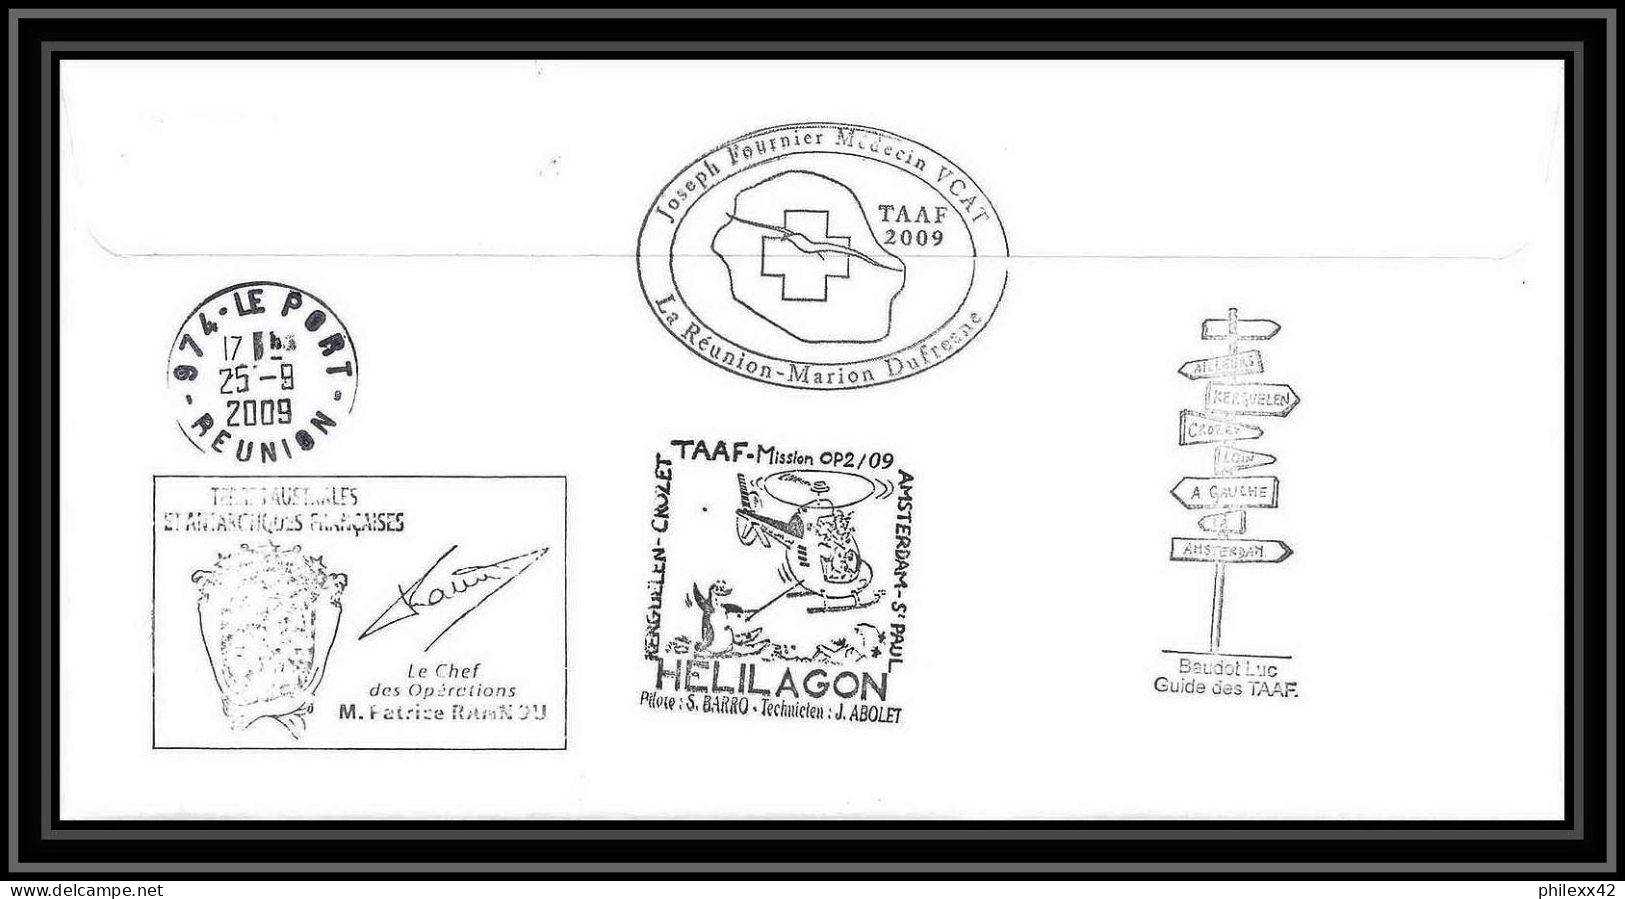 2929 Dufresne 2 Signé Signed OP 2/92009/2 Kerguelen N°532 Helilagon Terres Australes (taaf) Lettre Cover Petrel Bird - Helicopters